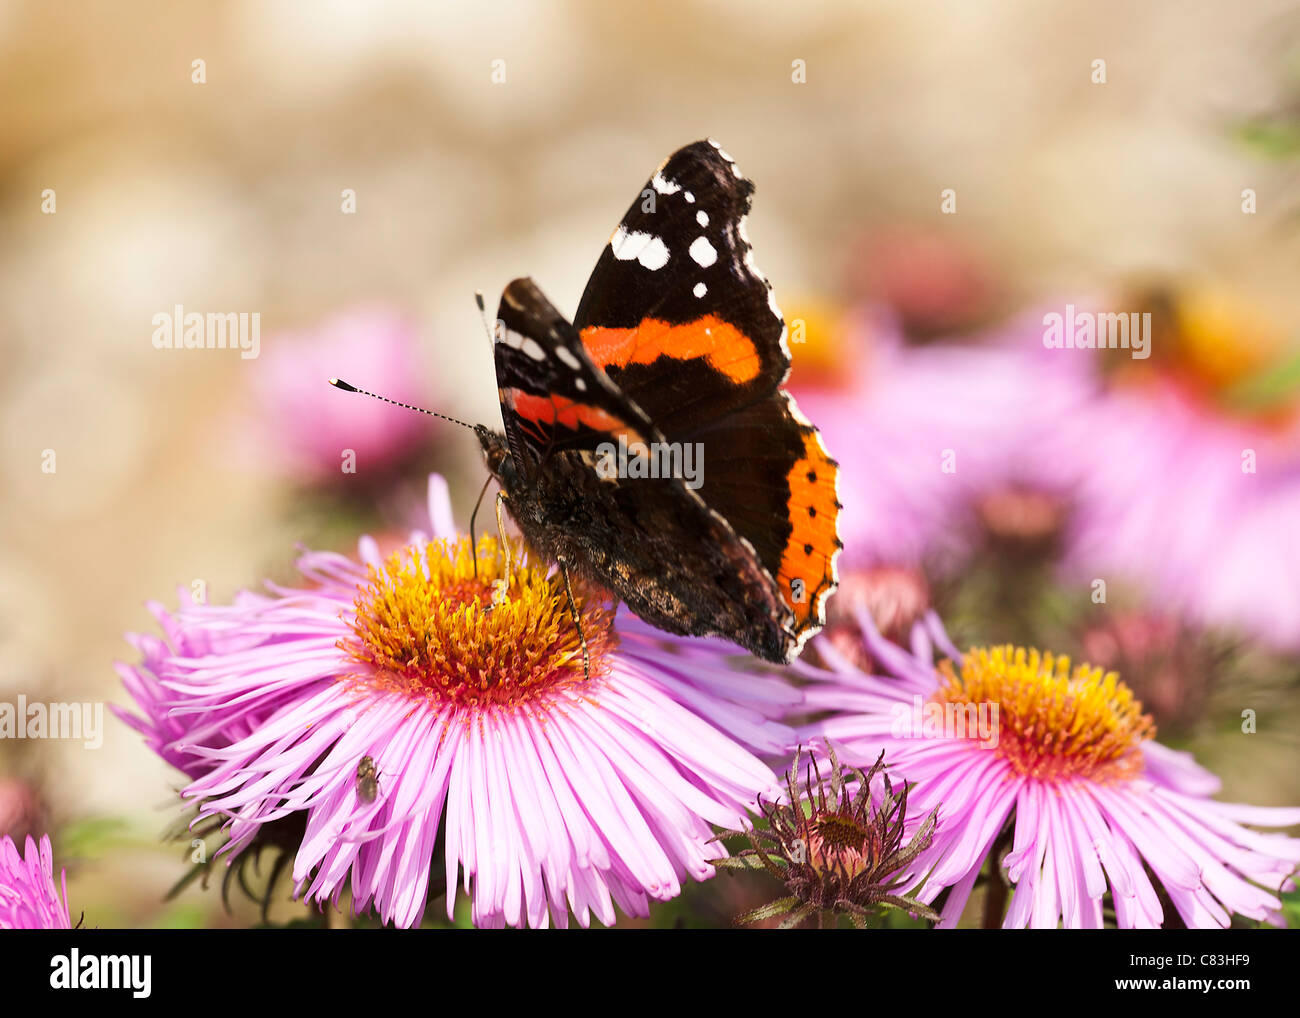 Red Admiral Butterfly Feeding on a Michaelmas Daisy Flower in a Northumberland Garden England United Kingdom UK Stock Photo